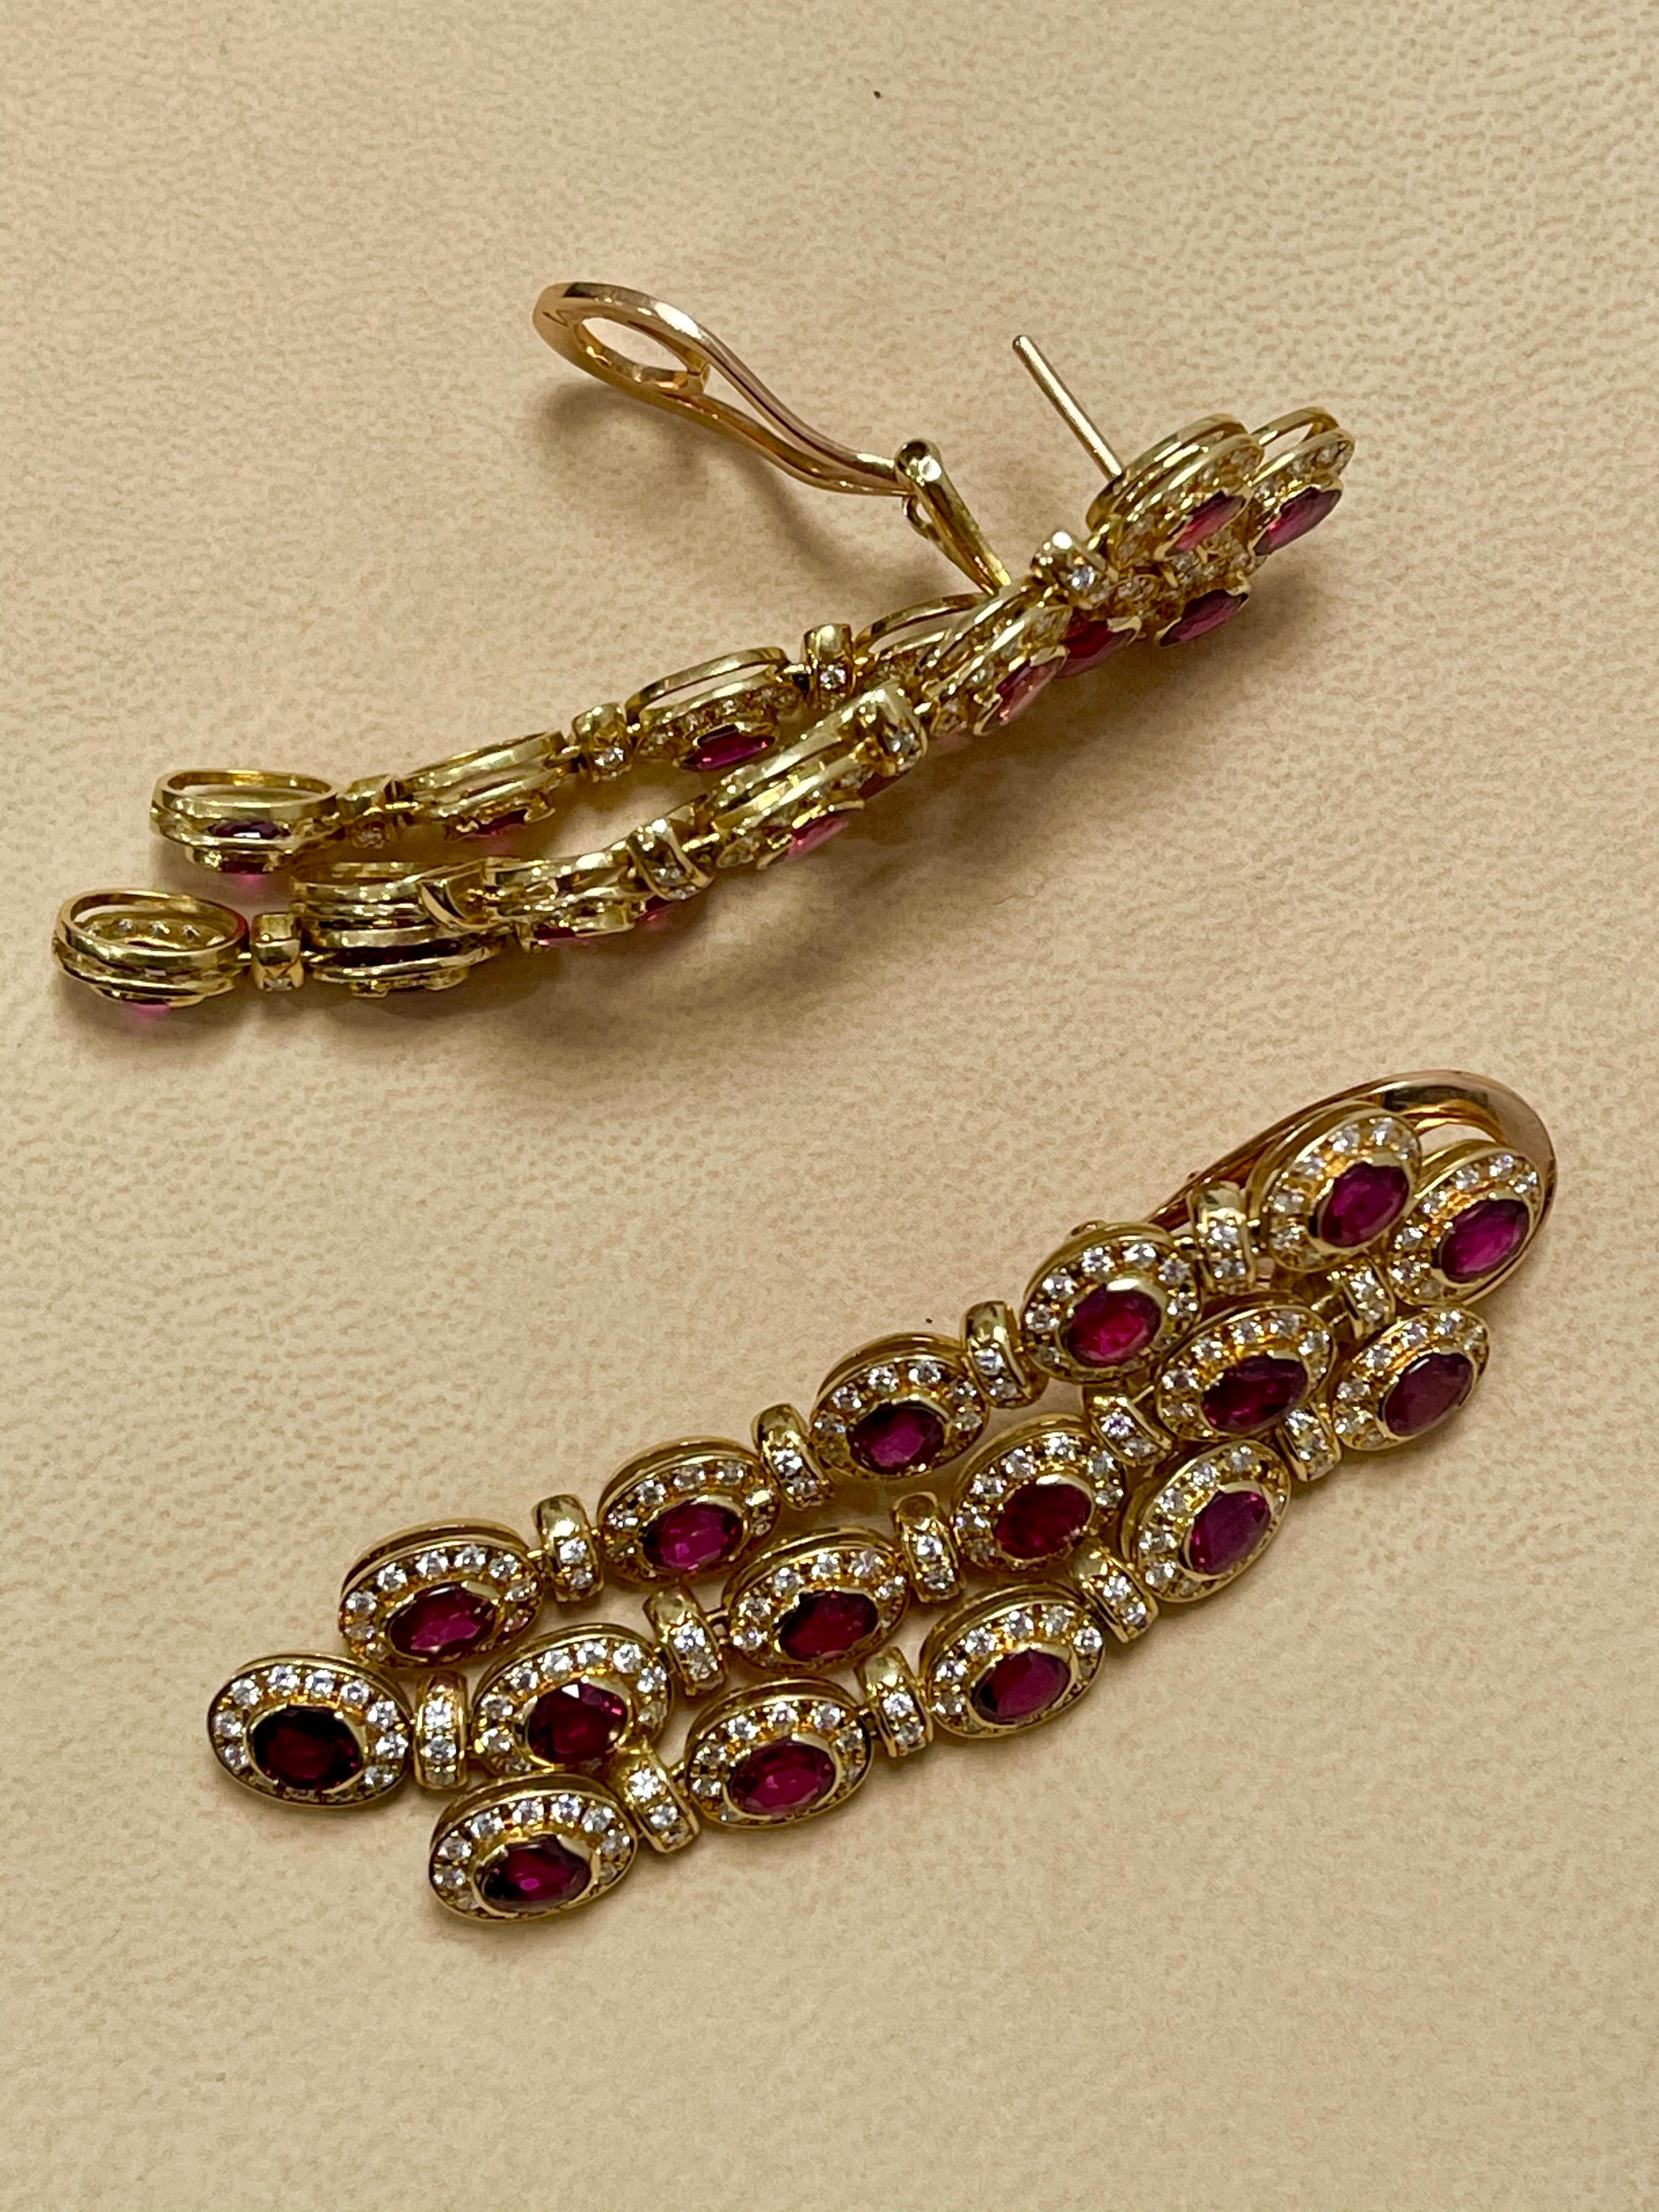 16 Ct Natural Burma Ruby & 10 Ct  Diamond Hanging/Drop Earrings 18 Kt Gold 35 Gm For Sale 5